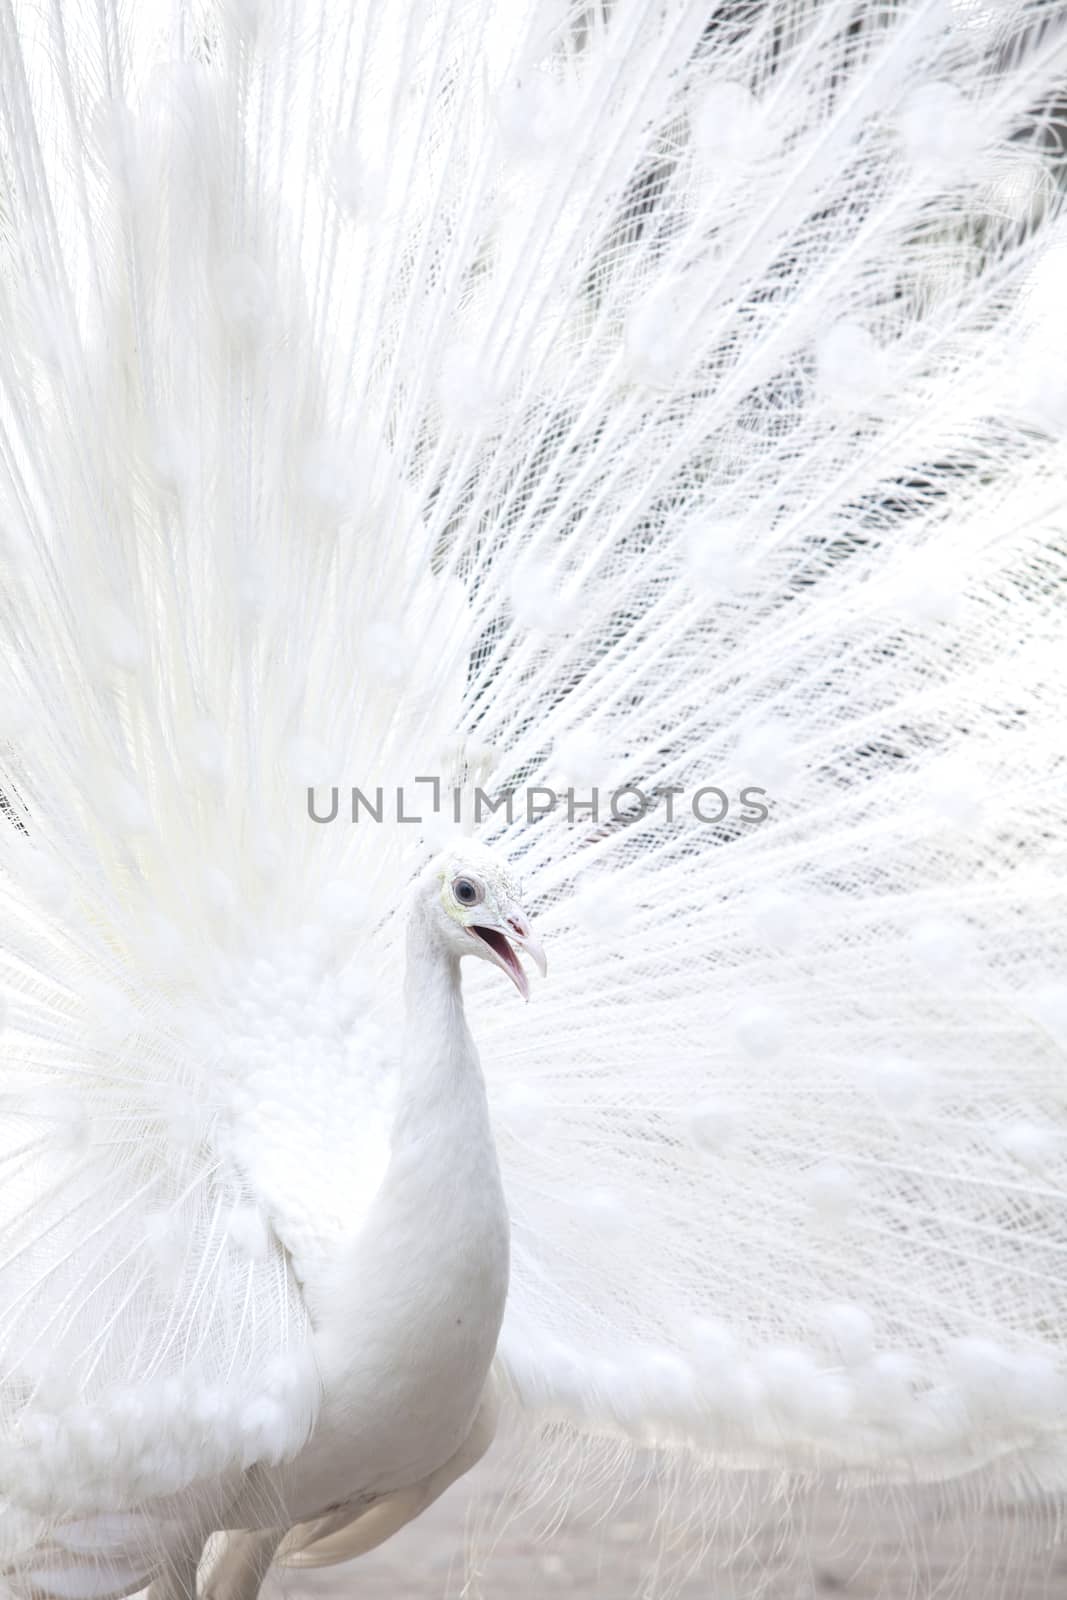 Portrait Of White Peacock During Courtship Display,white peacock shows its tail (feather)